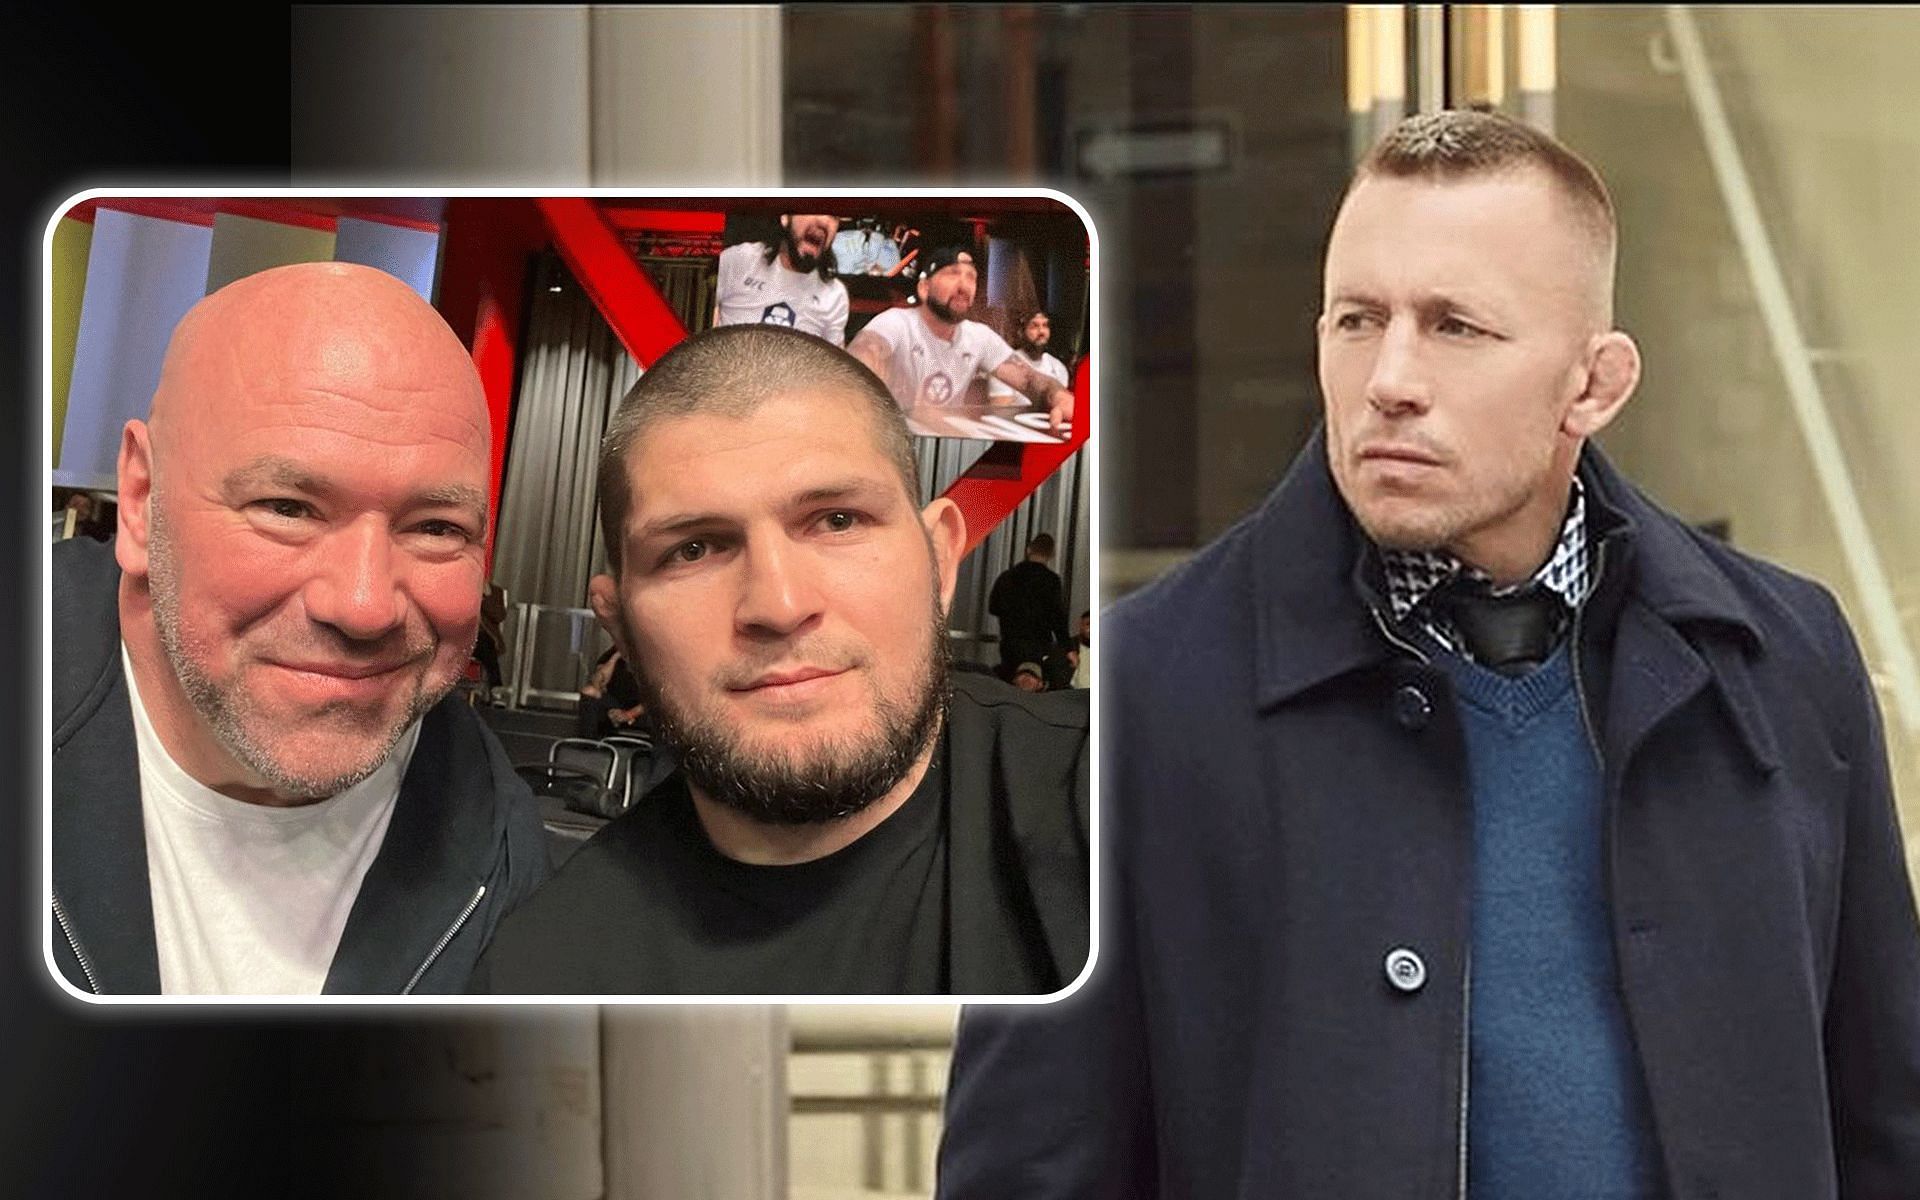 Georges St-Pierre opens up on missing out boxing match after Dana White nixed the deal. [Image courtesy: @georgesstpierre &amp; @khabib_nurmagomedov on Instagram]